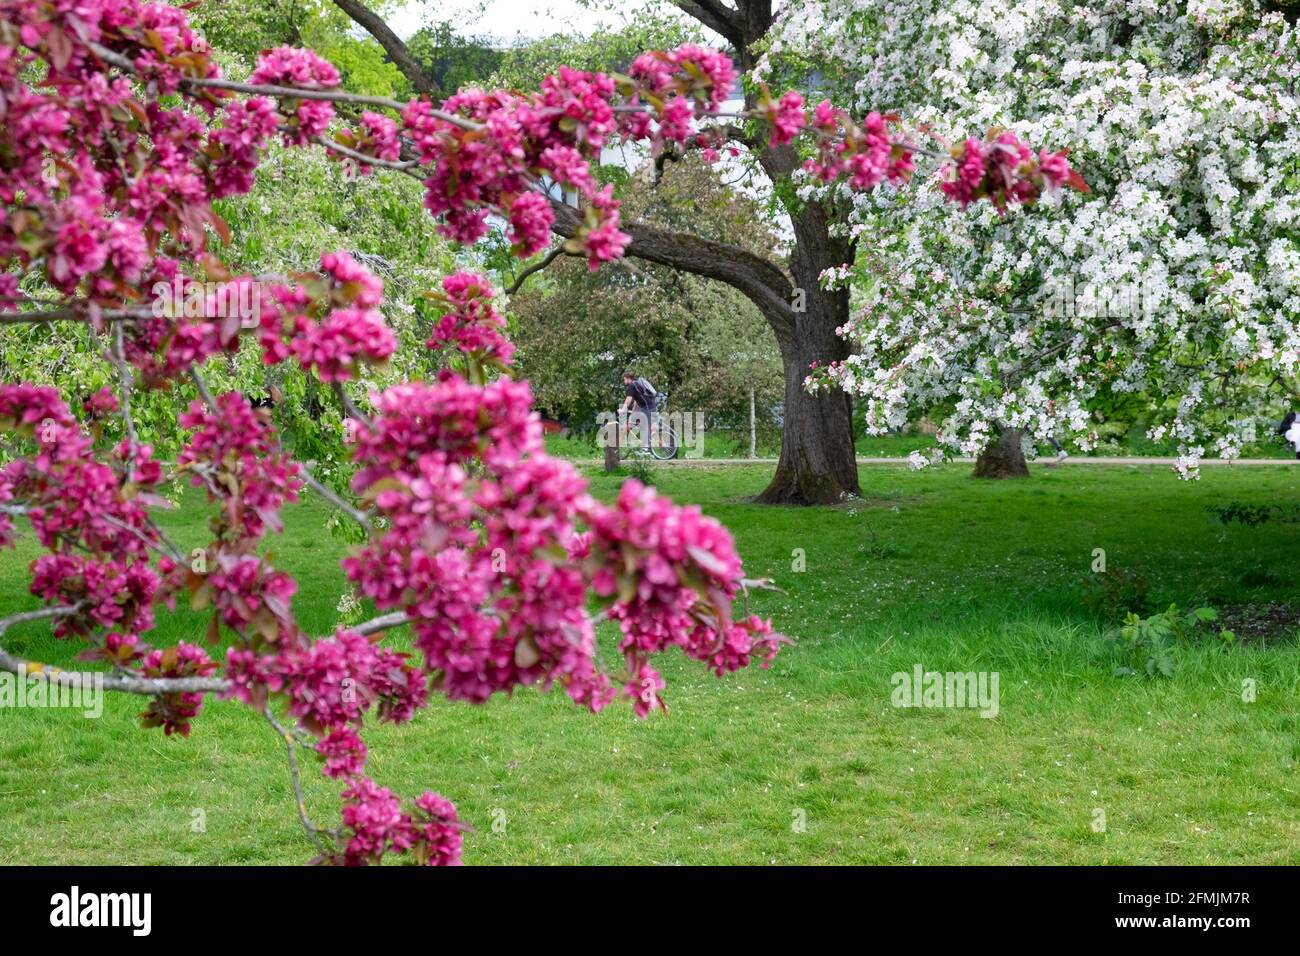 Beautiful trees in blossom in Bute Park landscape in spring May 2021 Cardiff Wales Great Britain UK  KATHY DEWITT Stock Photo